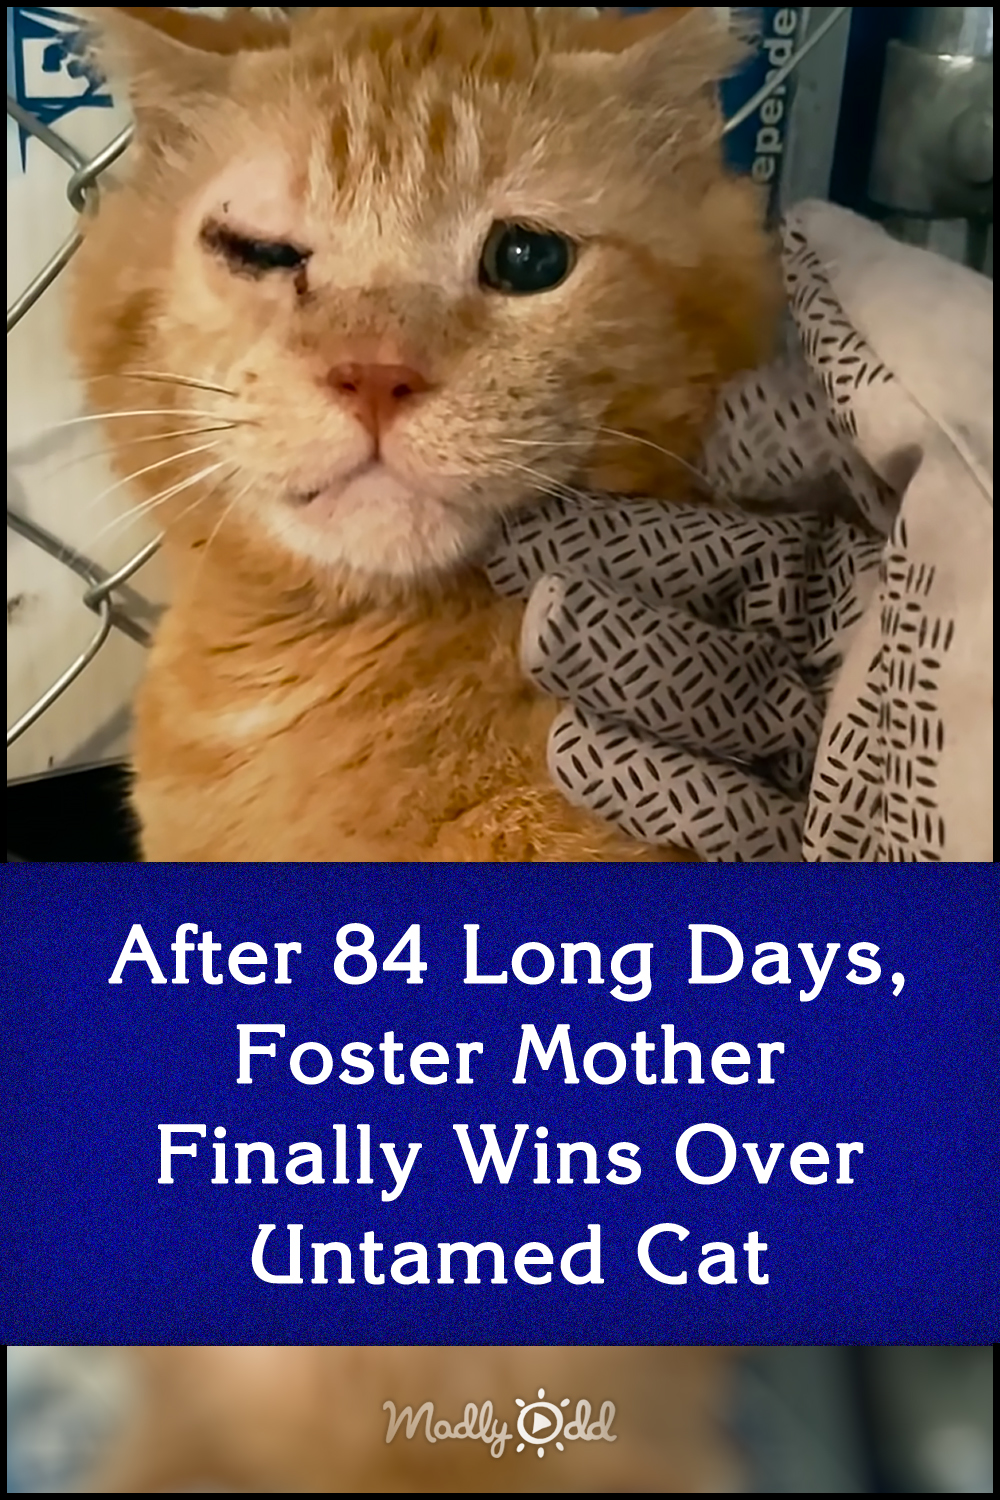 After 84 Long Days, Foster Mother Finally Wins Over Untamed Cat